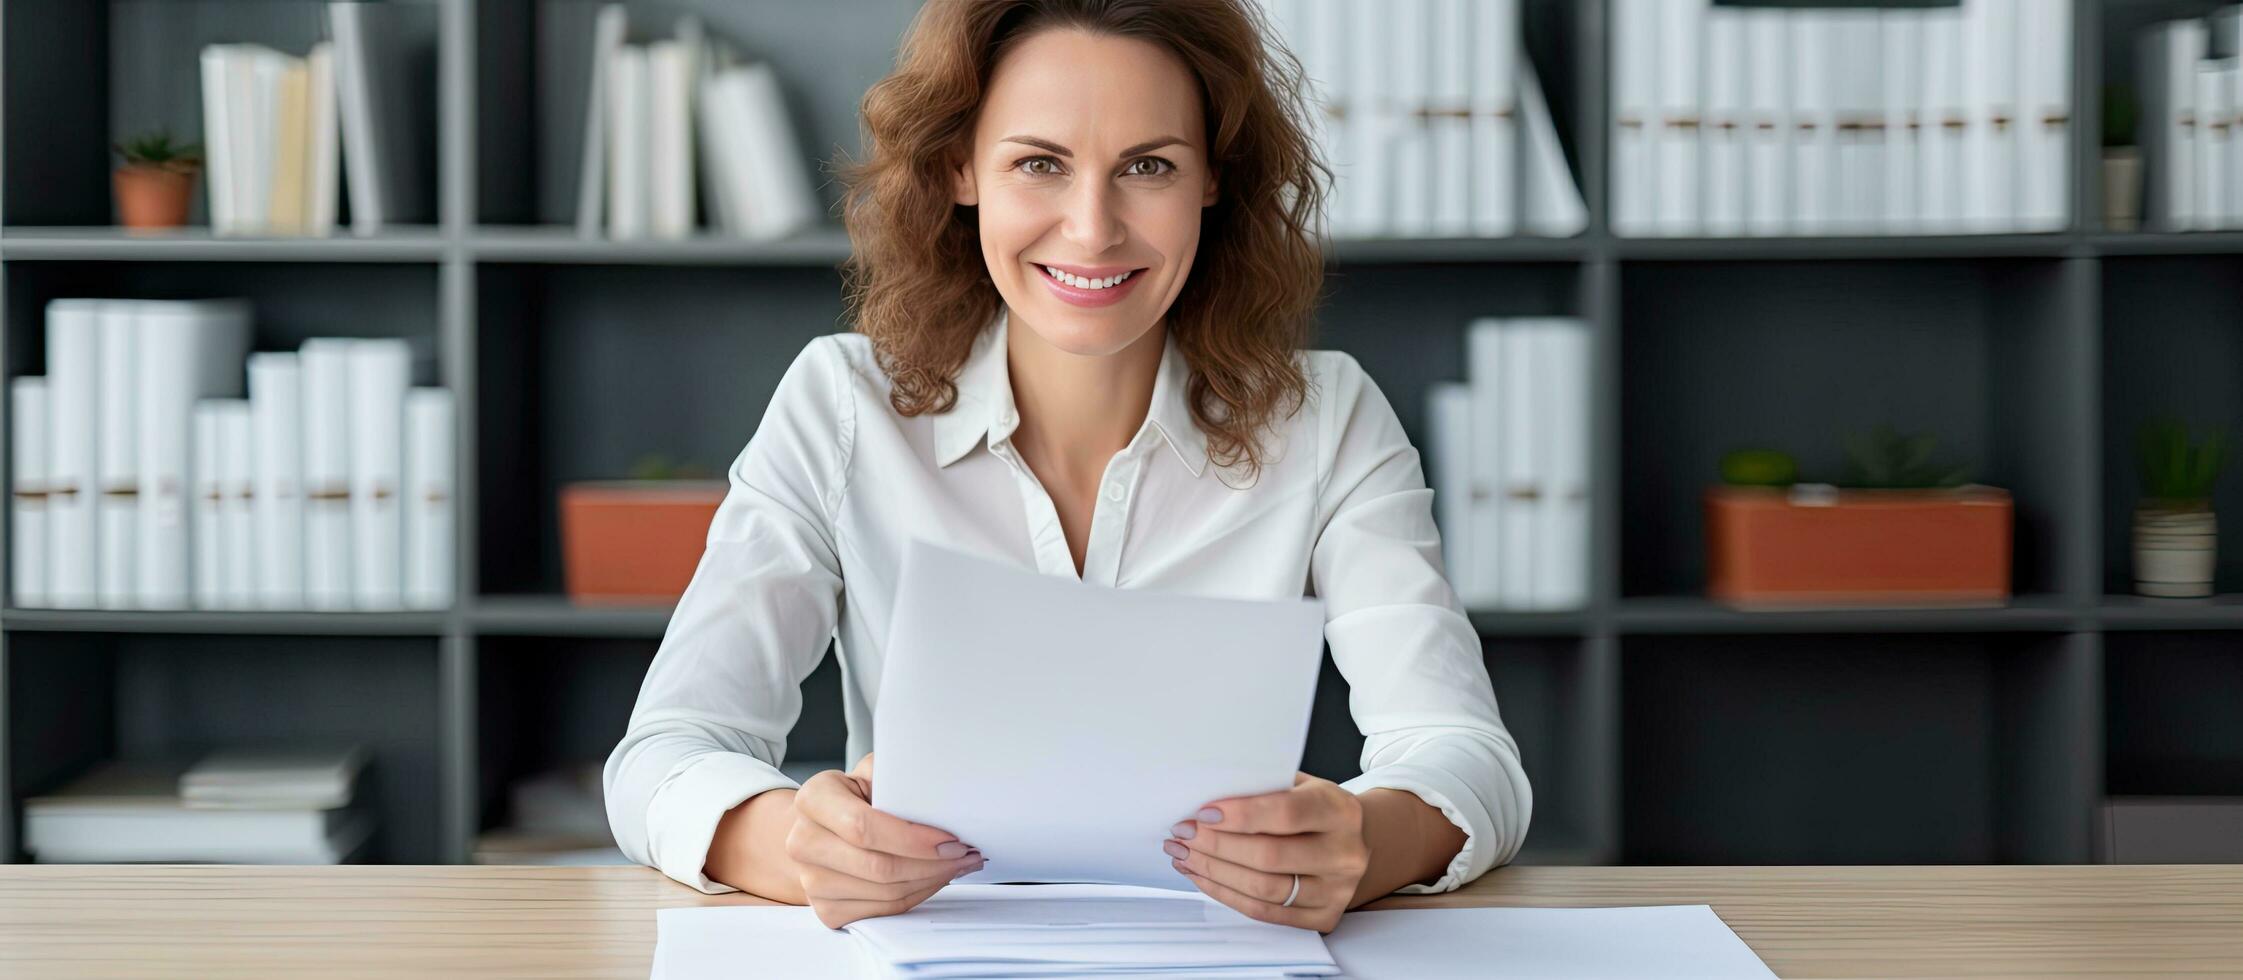 Caucasian woman at desk happy smile white shirt paper documents looking at camera photo